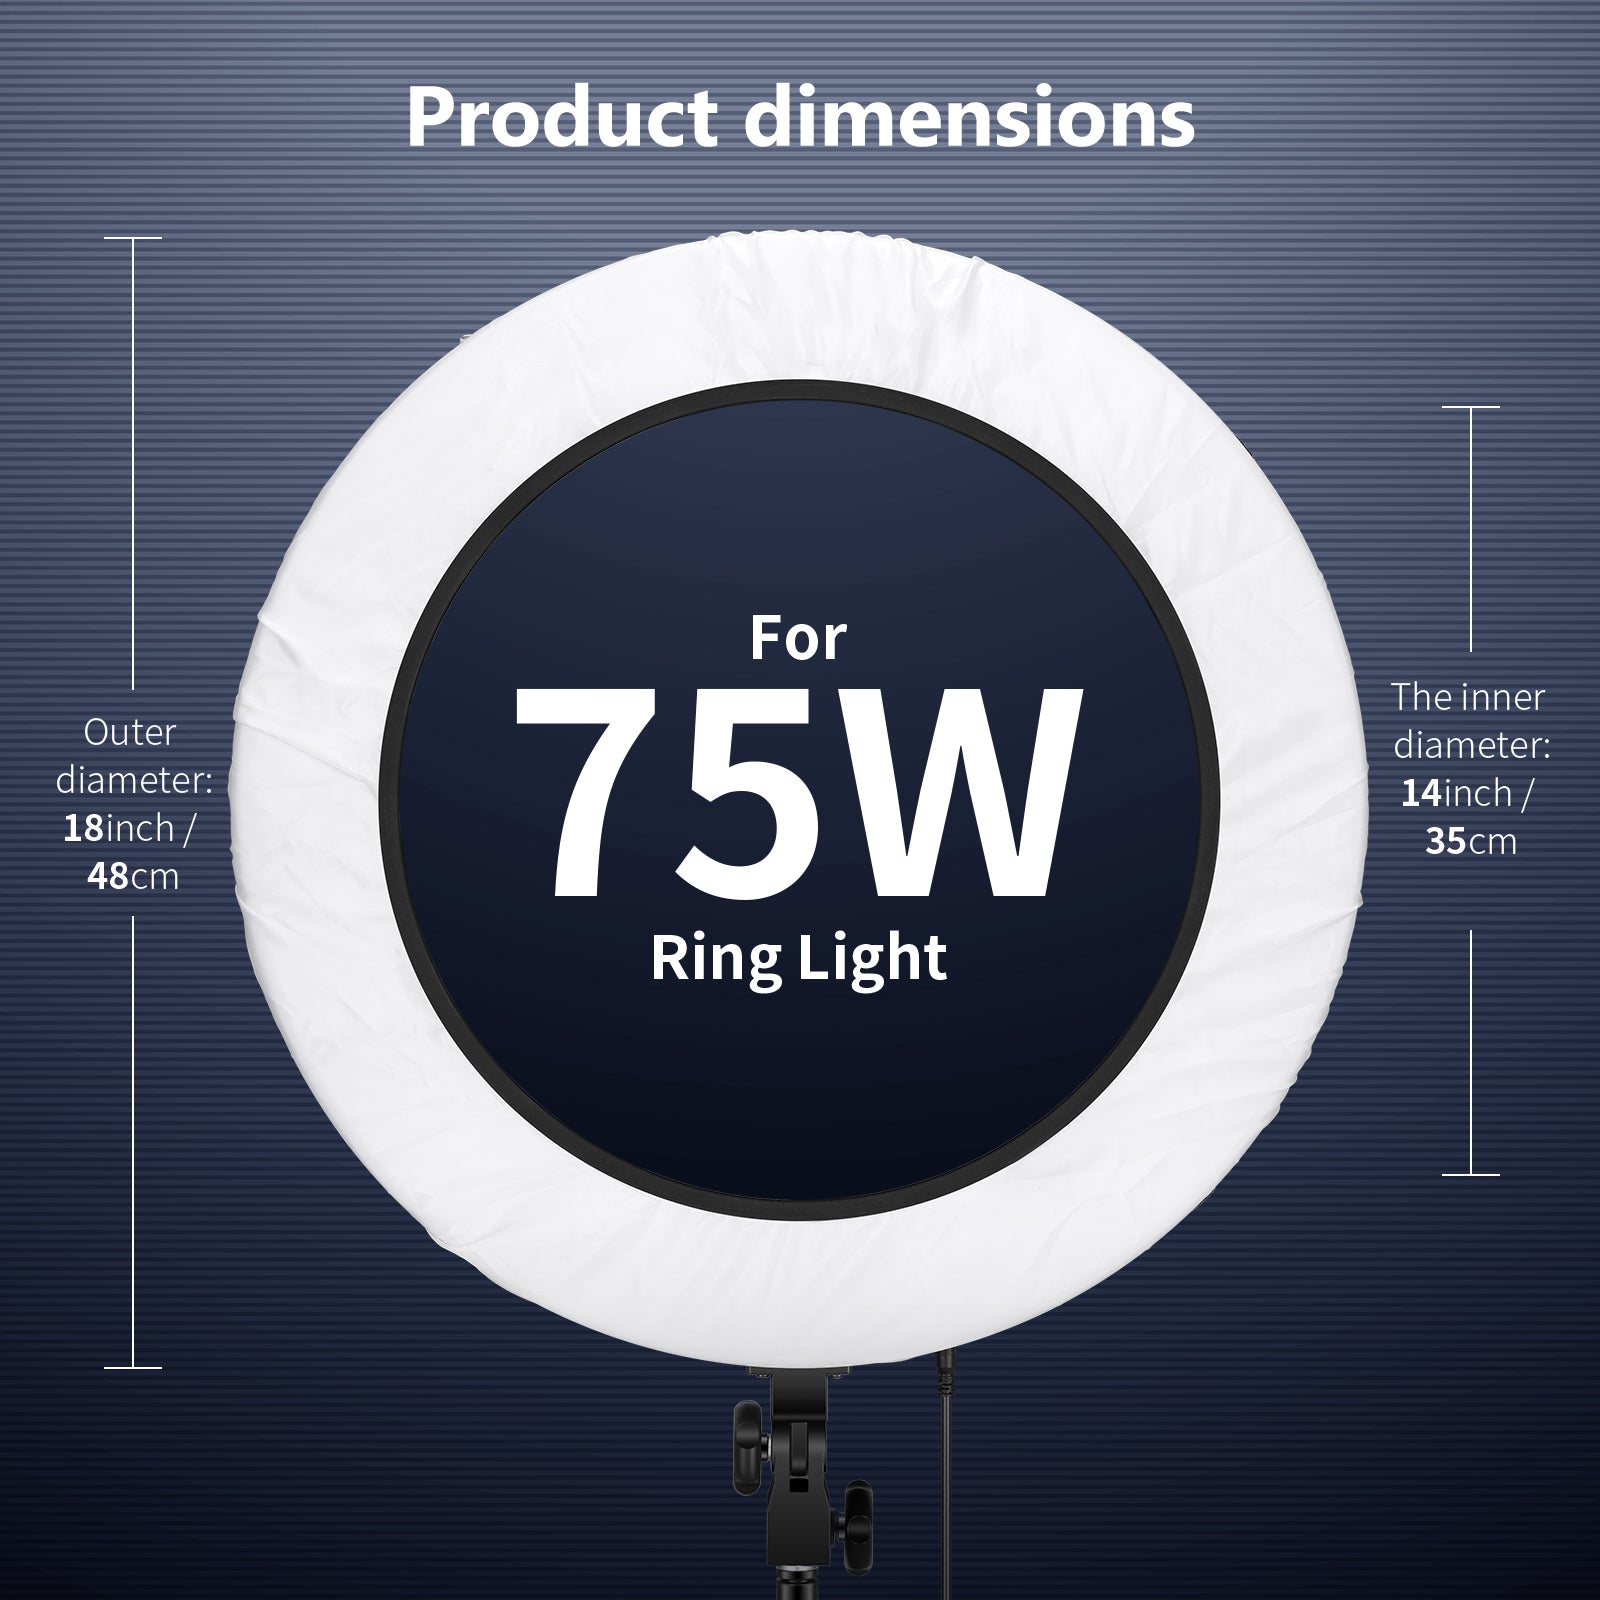 NEEWER Ring Light Kit: 18/45cm Outer 55W 5600K Dimmable LED Ring